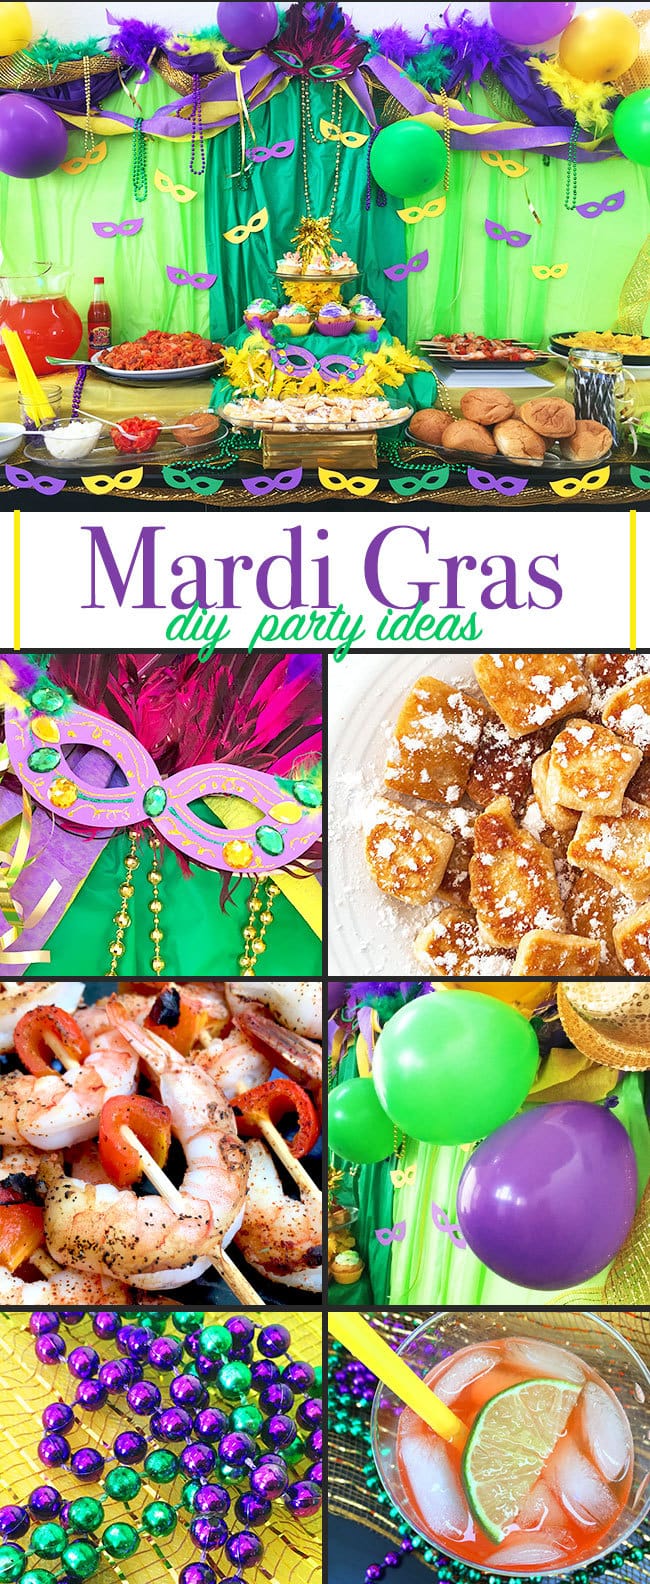 Mardi Gras party ideas you can make yourself